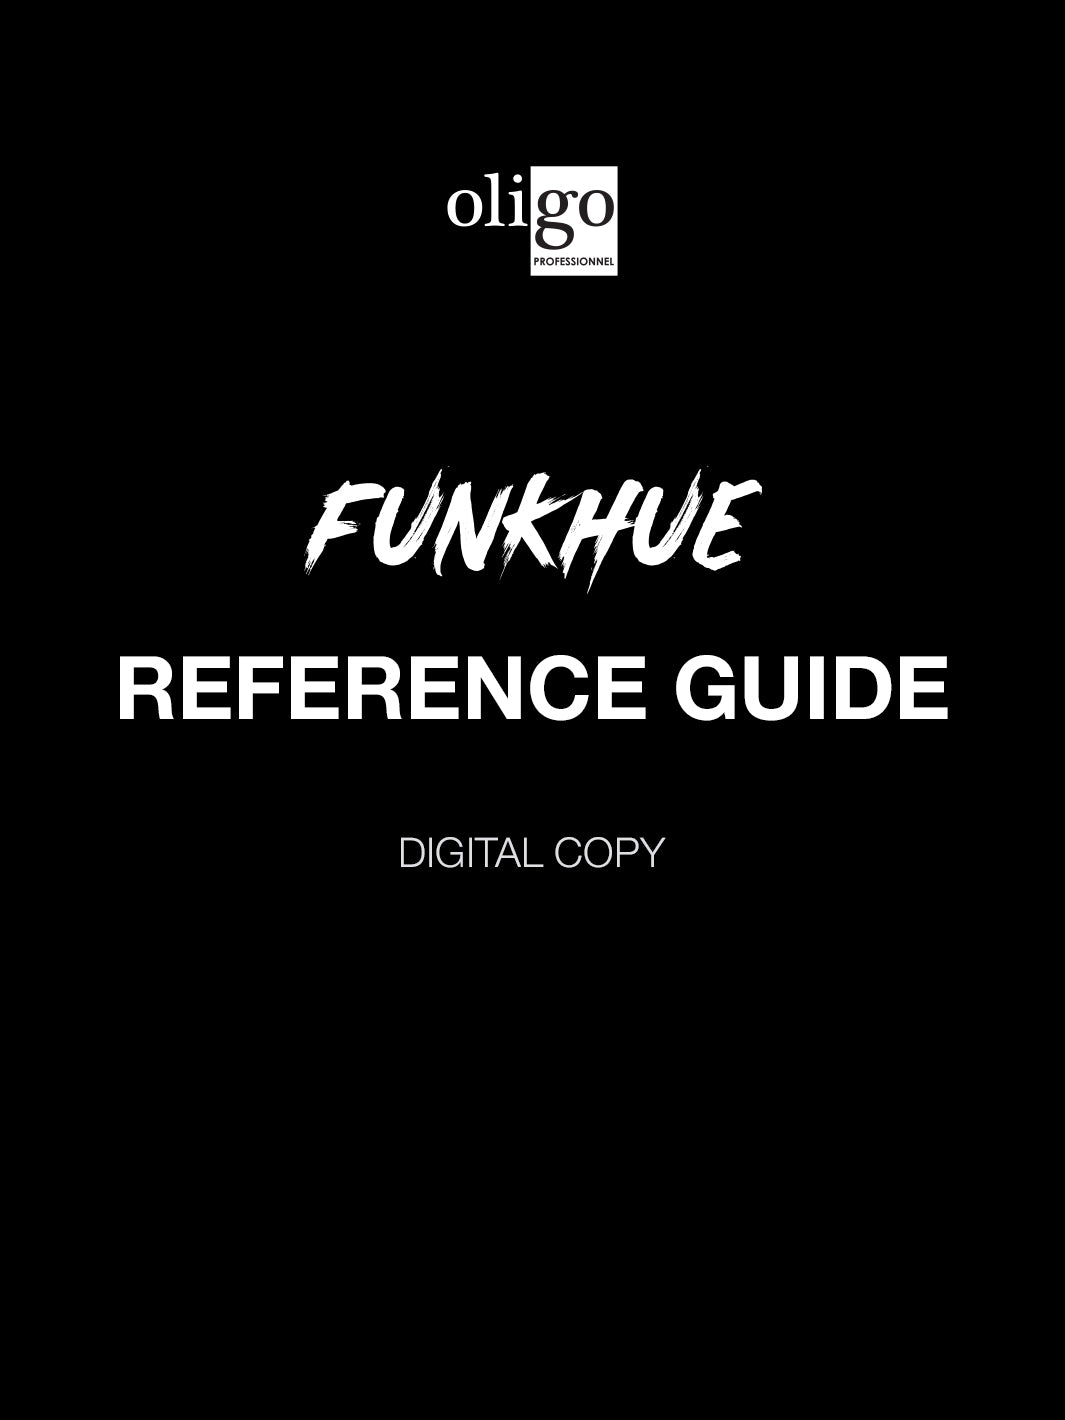 FunkHue Reference Guide (digital copy)